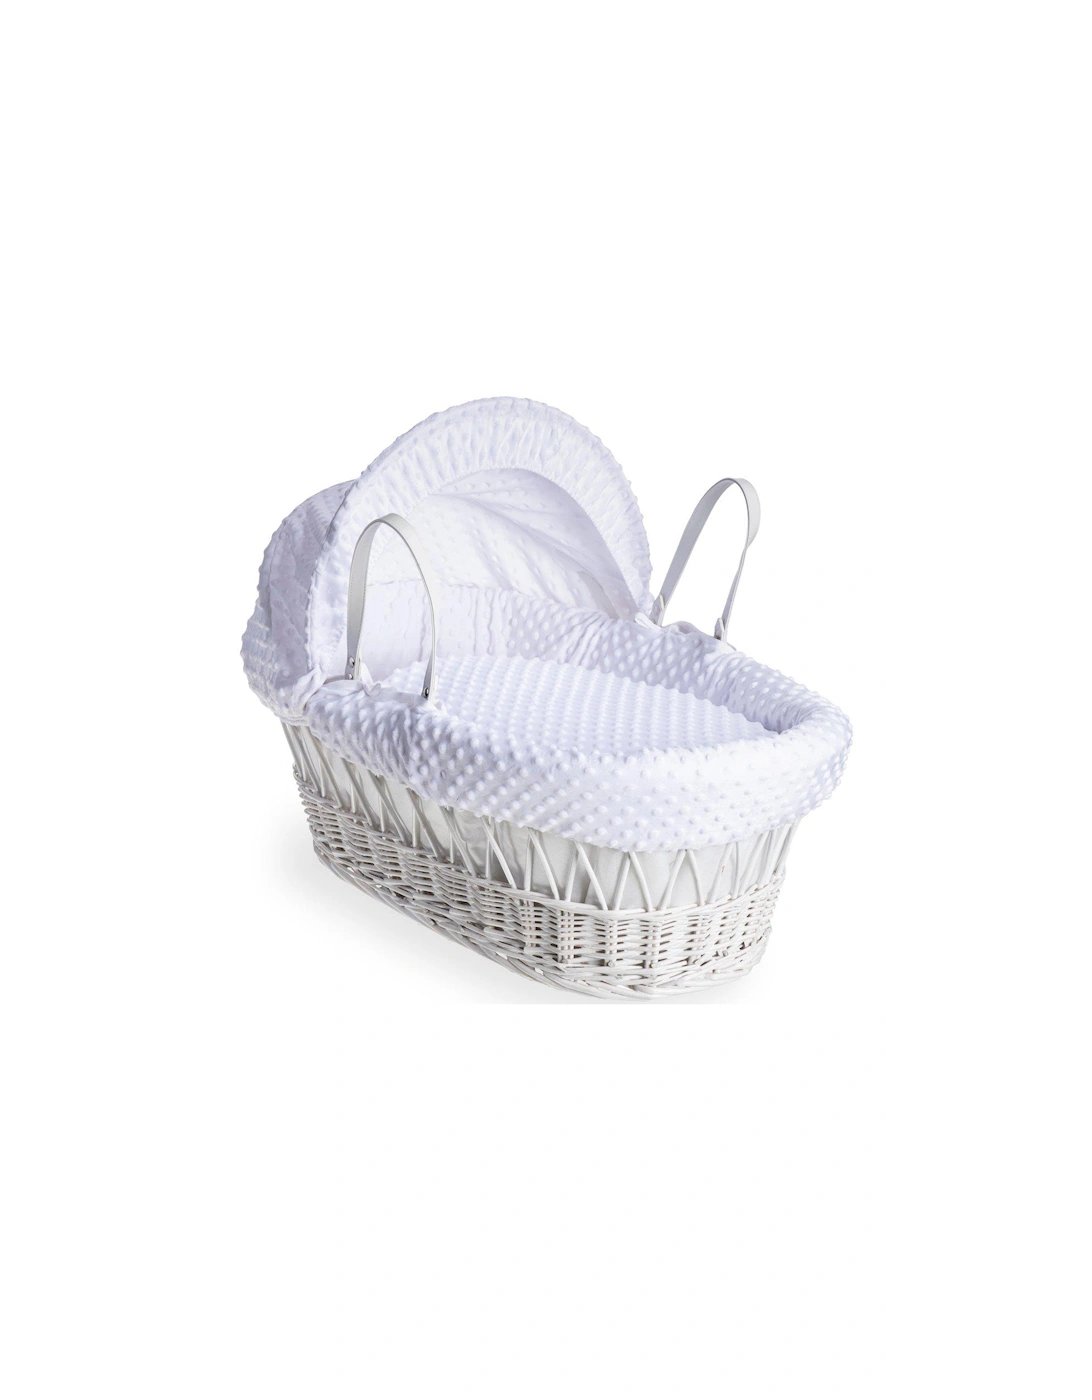 Dimple White Wicker & Deluxe Stand White